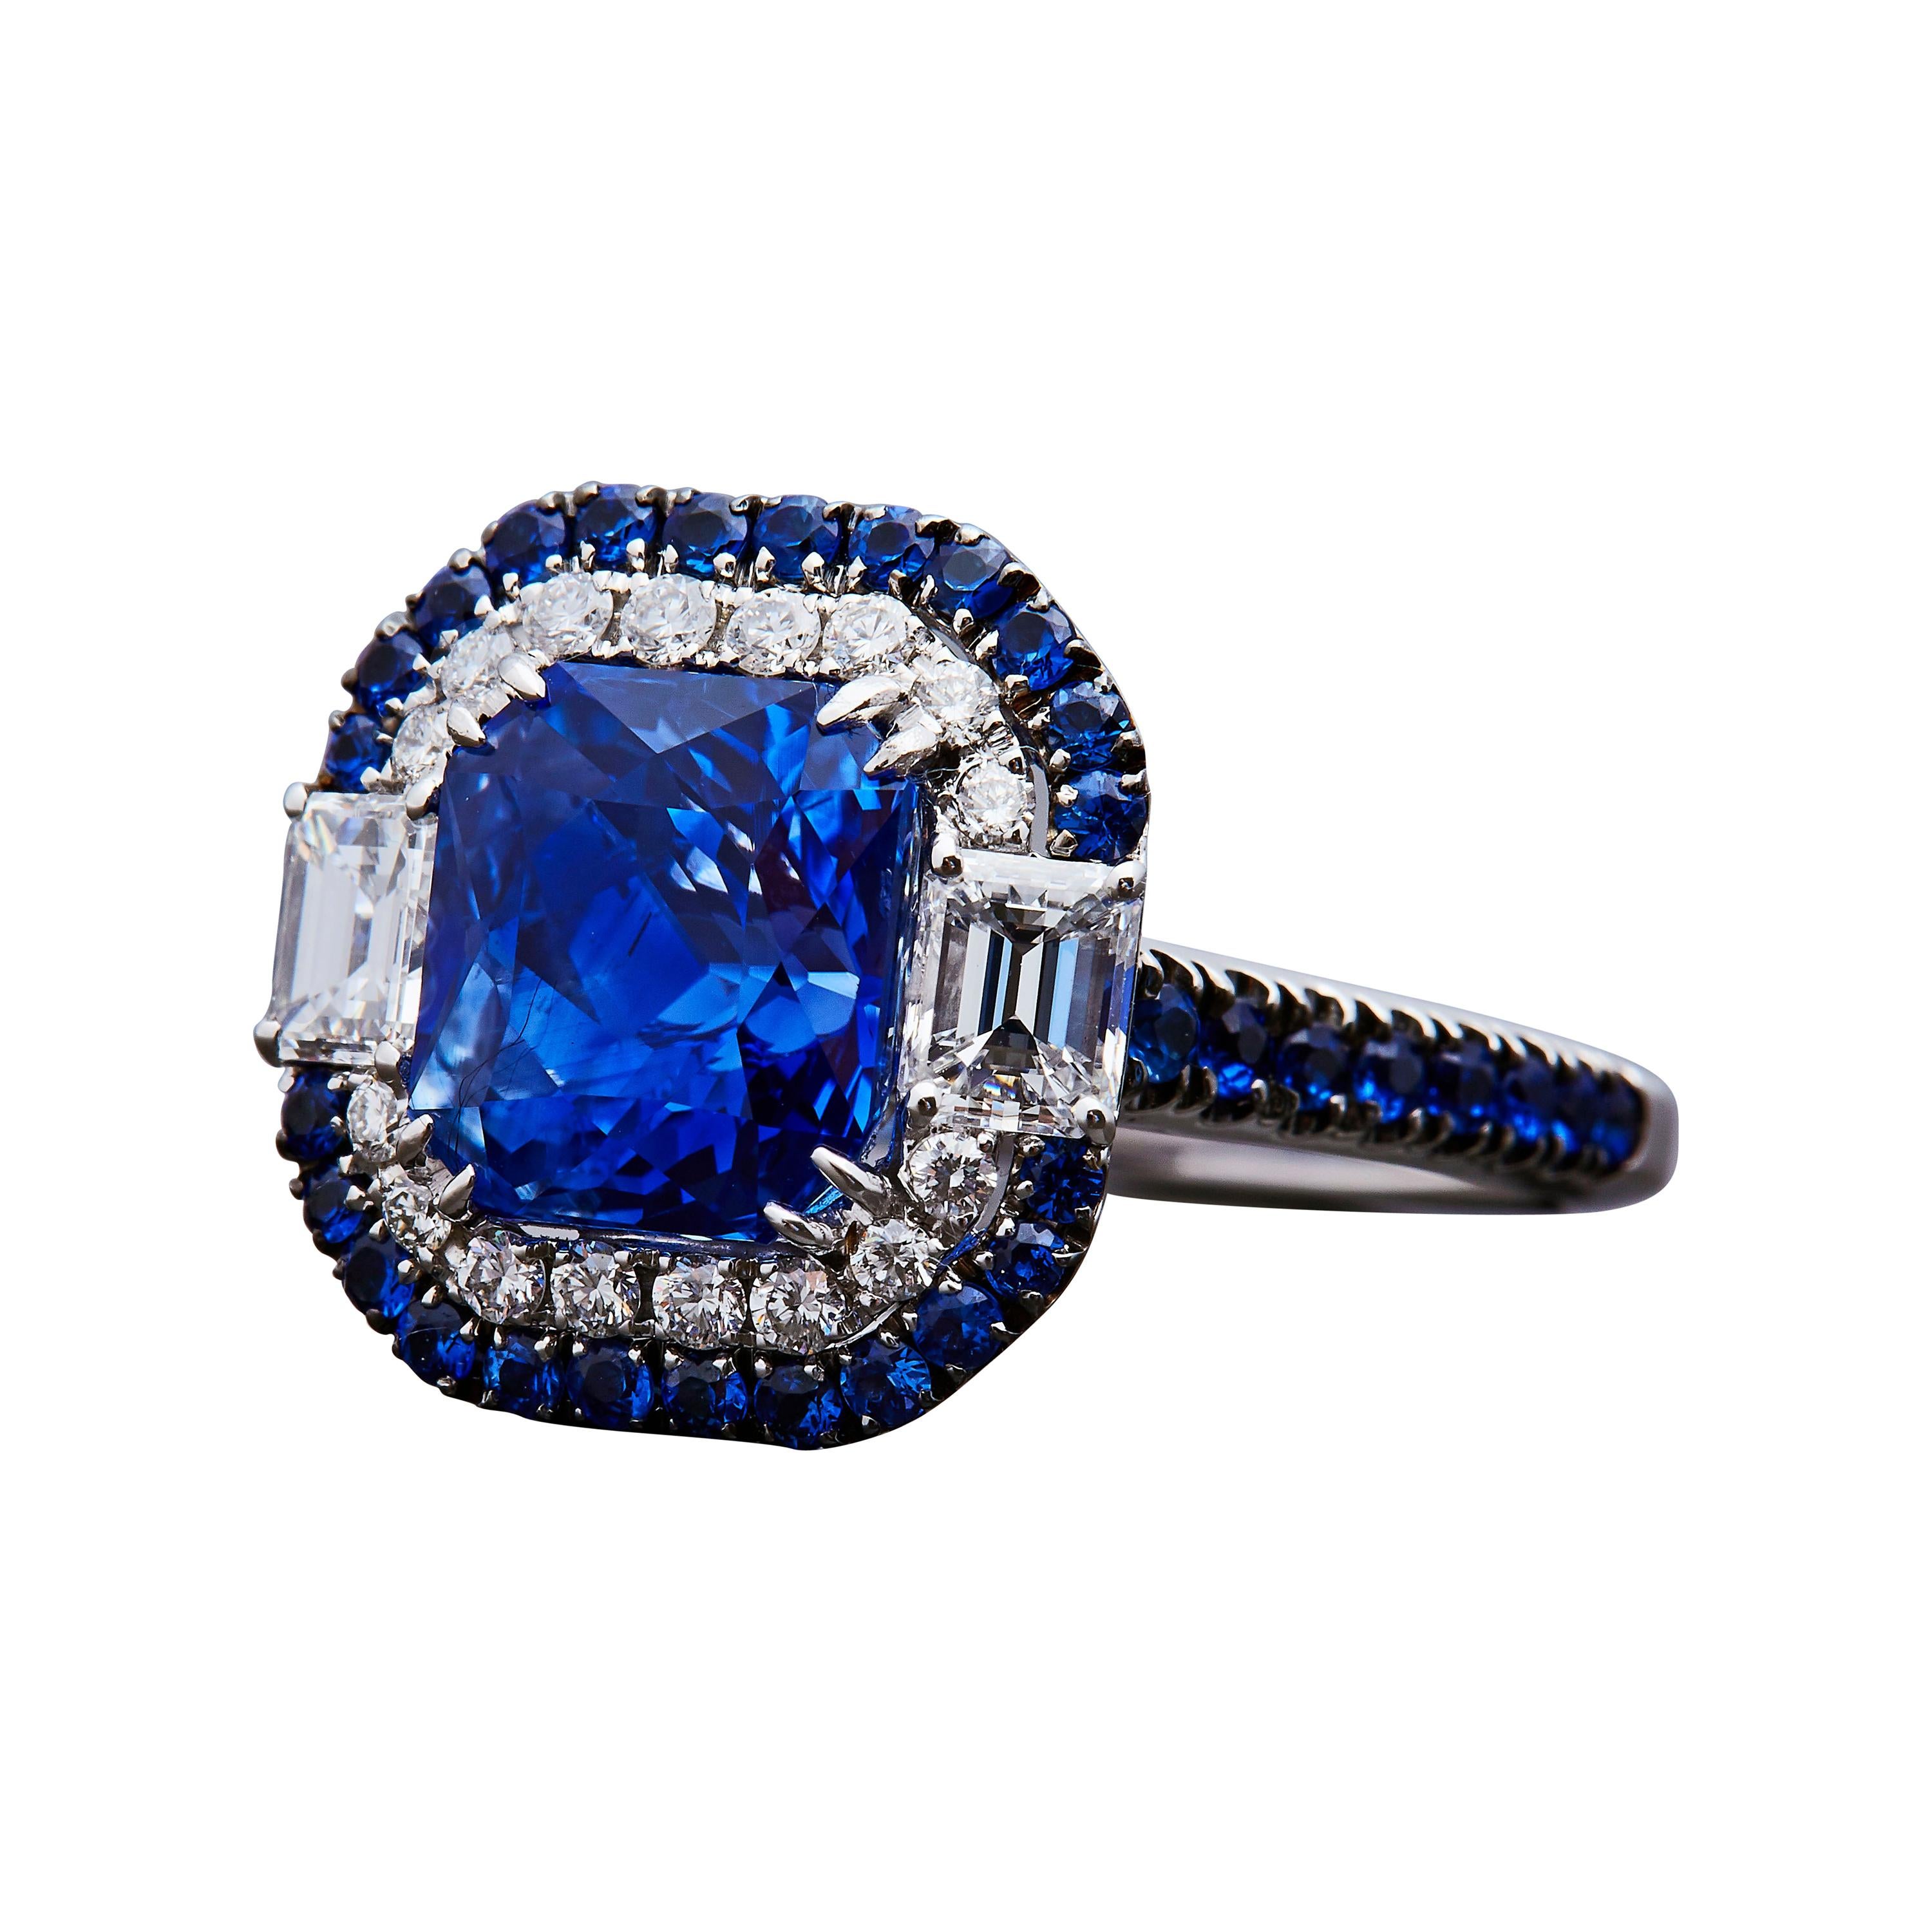 Art Deco Inspired 4.11ct Certified Unheated Blue Cushion Sapphire Ring For Sale